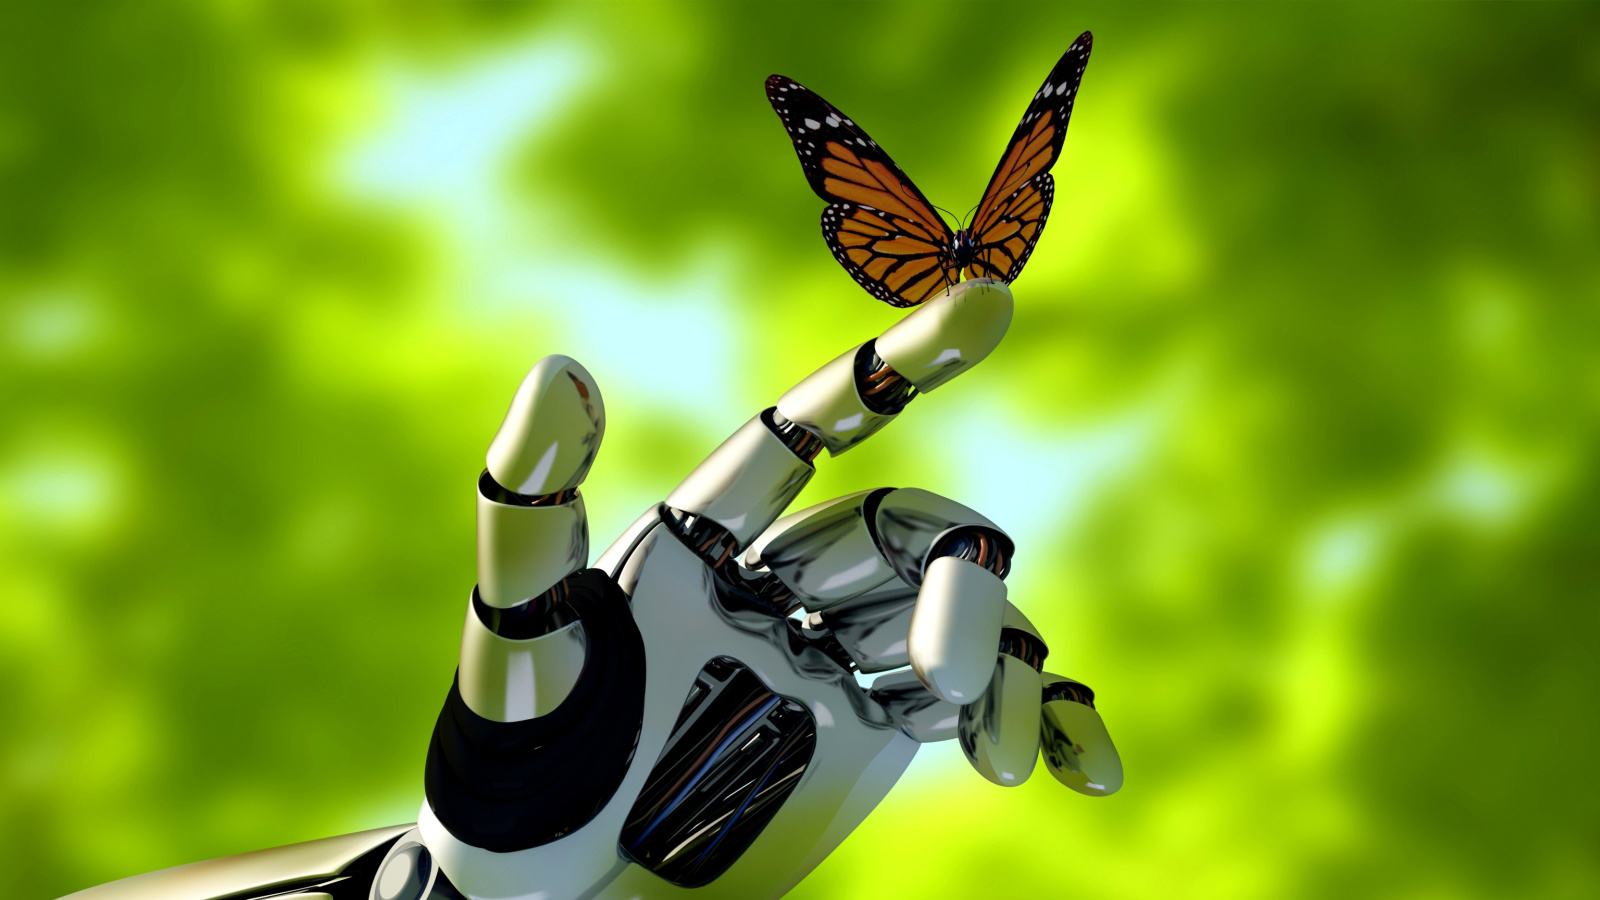 Robot hand and butterfly wallpaper 1600x900